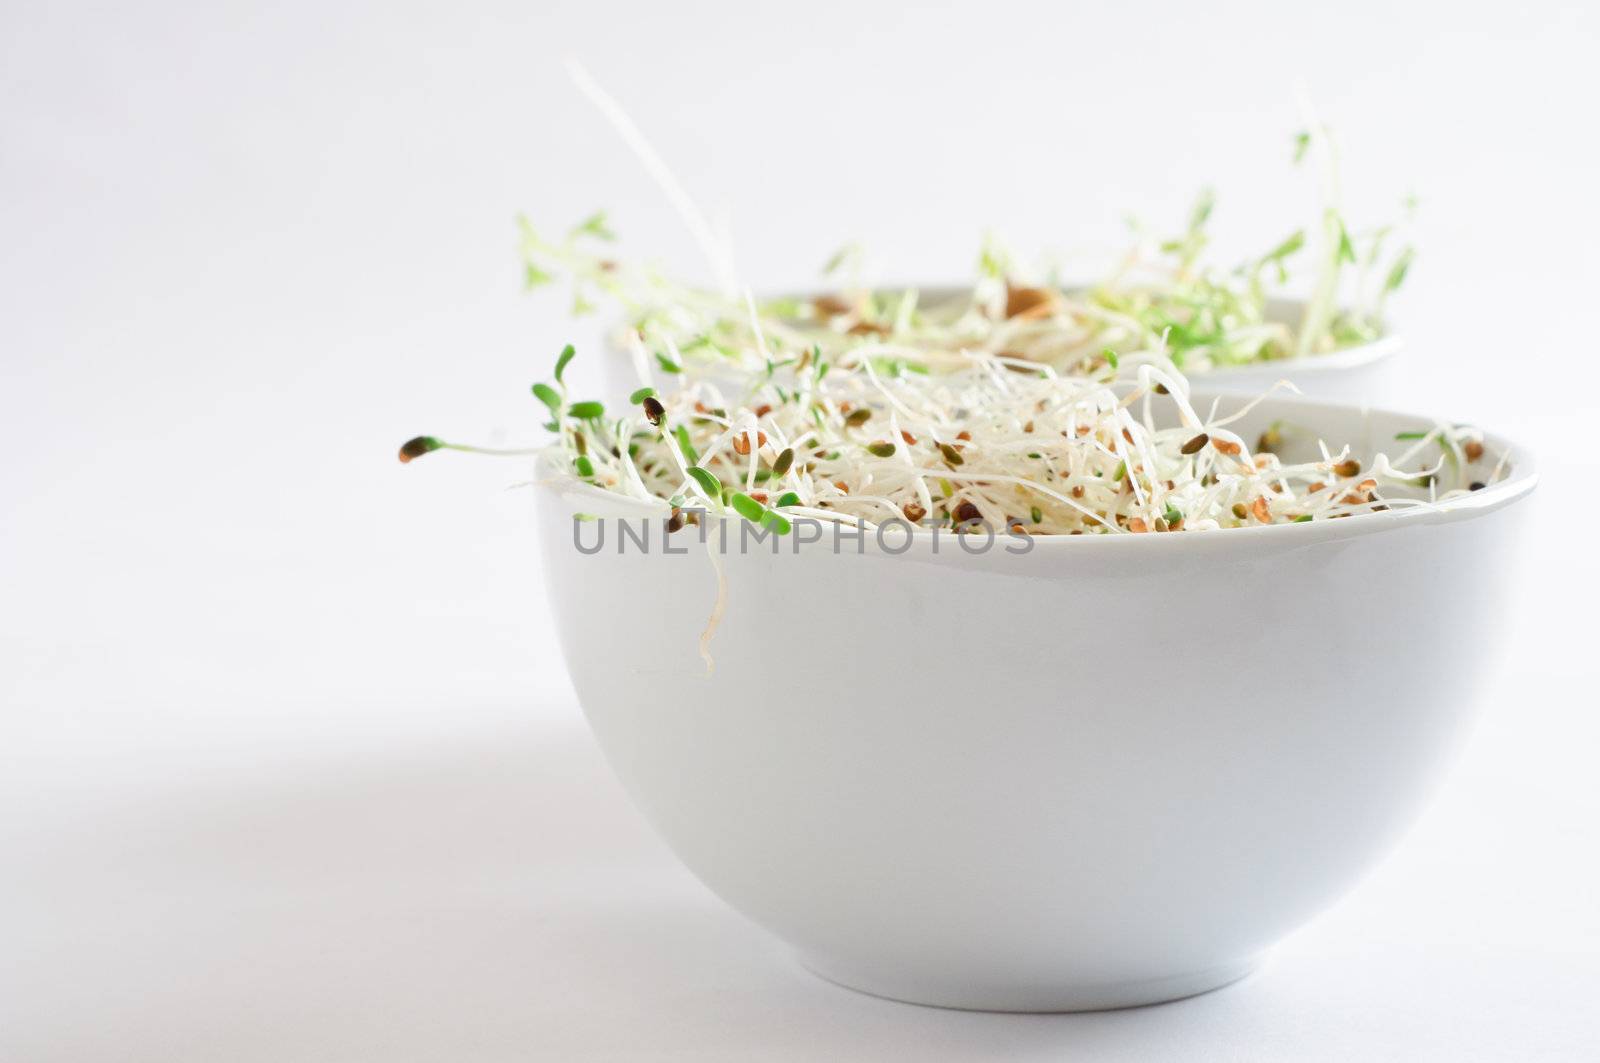 Two bowls of beansprouts.  Alfalfa in foreground, green lentil in background.  Copy space to left.